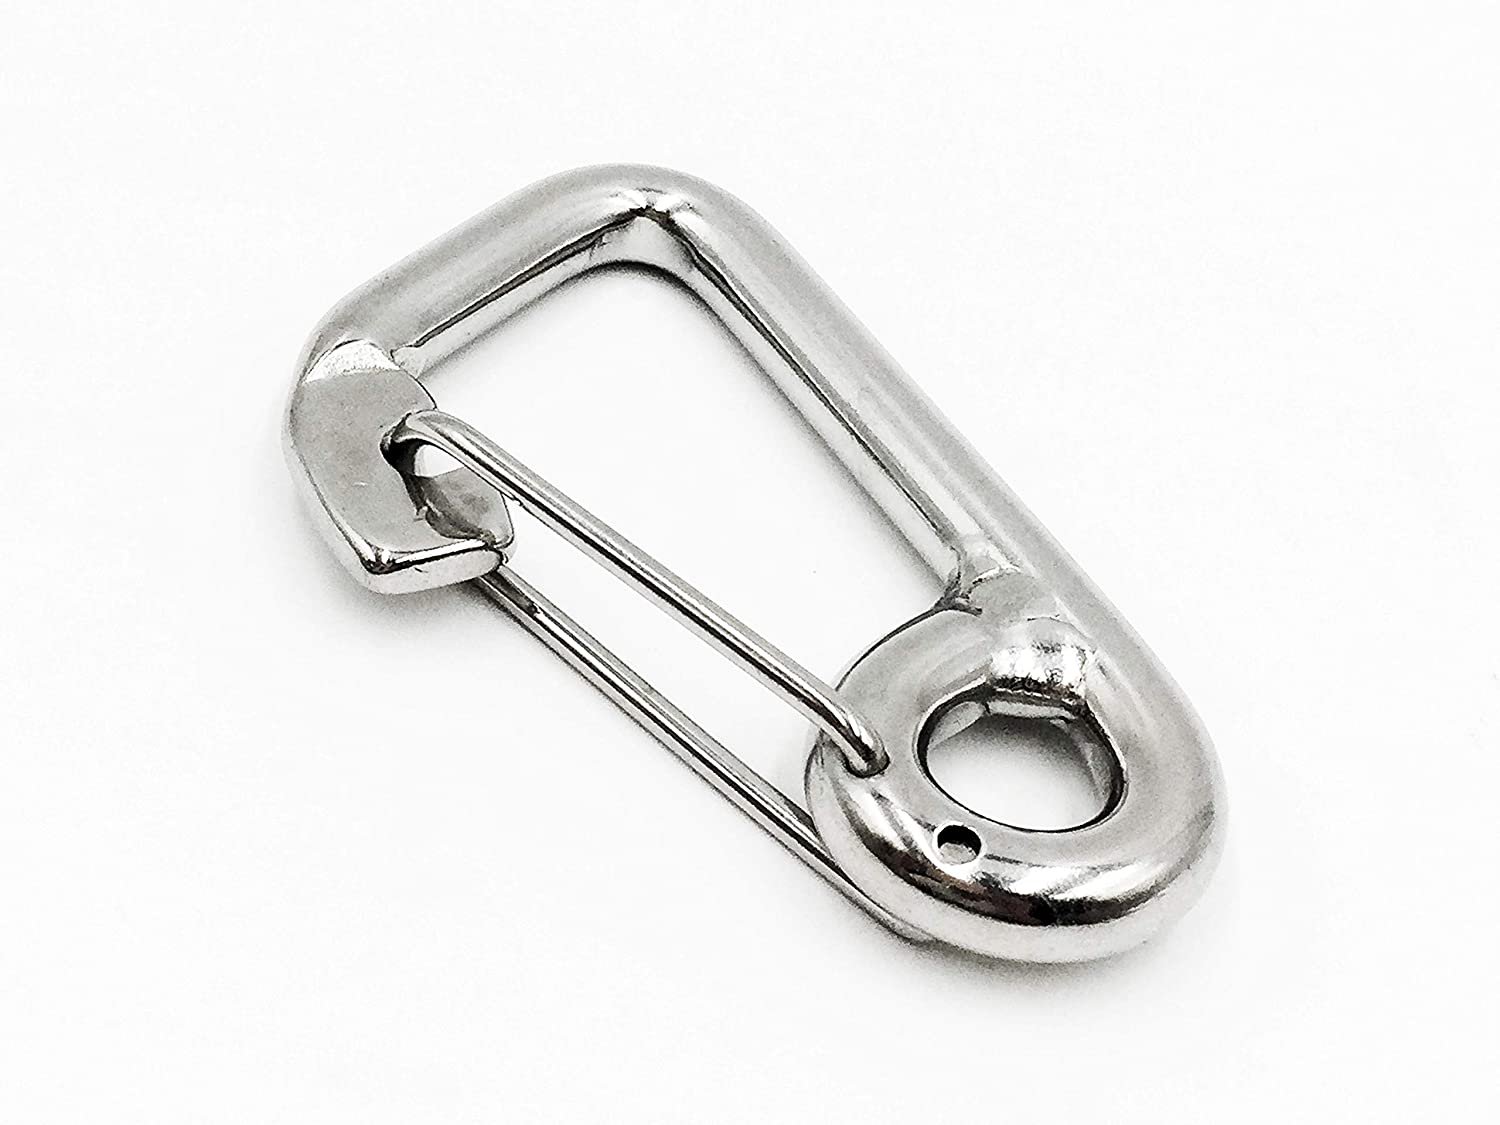 Marine City 316 Marine Grade Stainless Steel Carabiner Spring Snap Hook Boat C:2-3/8 inches - image 5 of 9